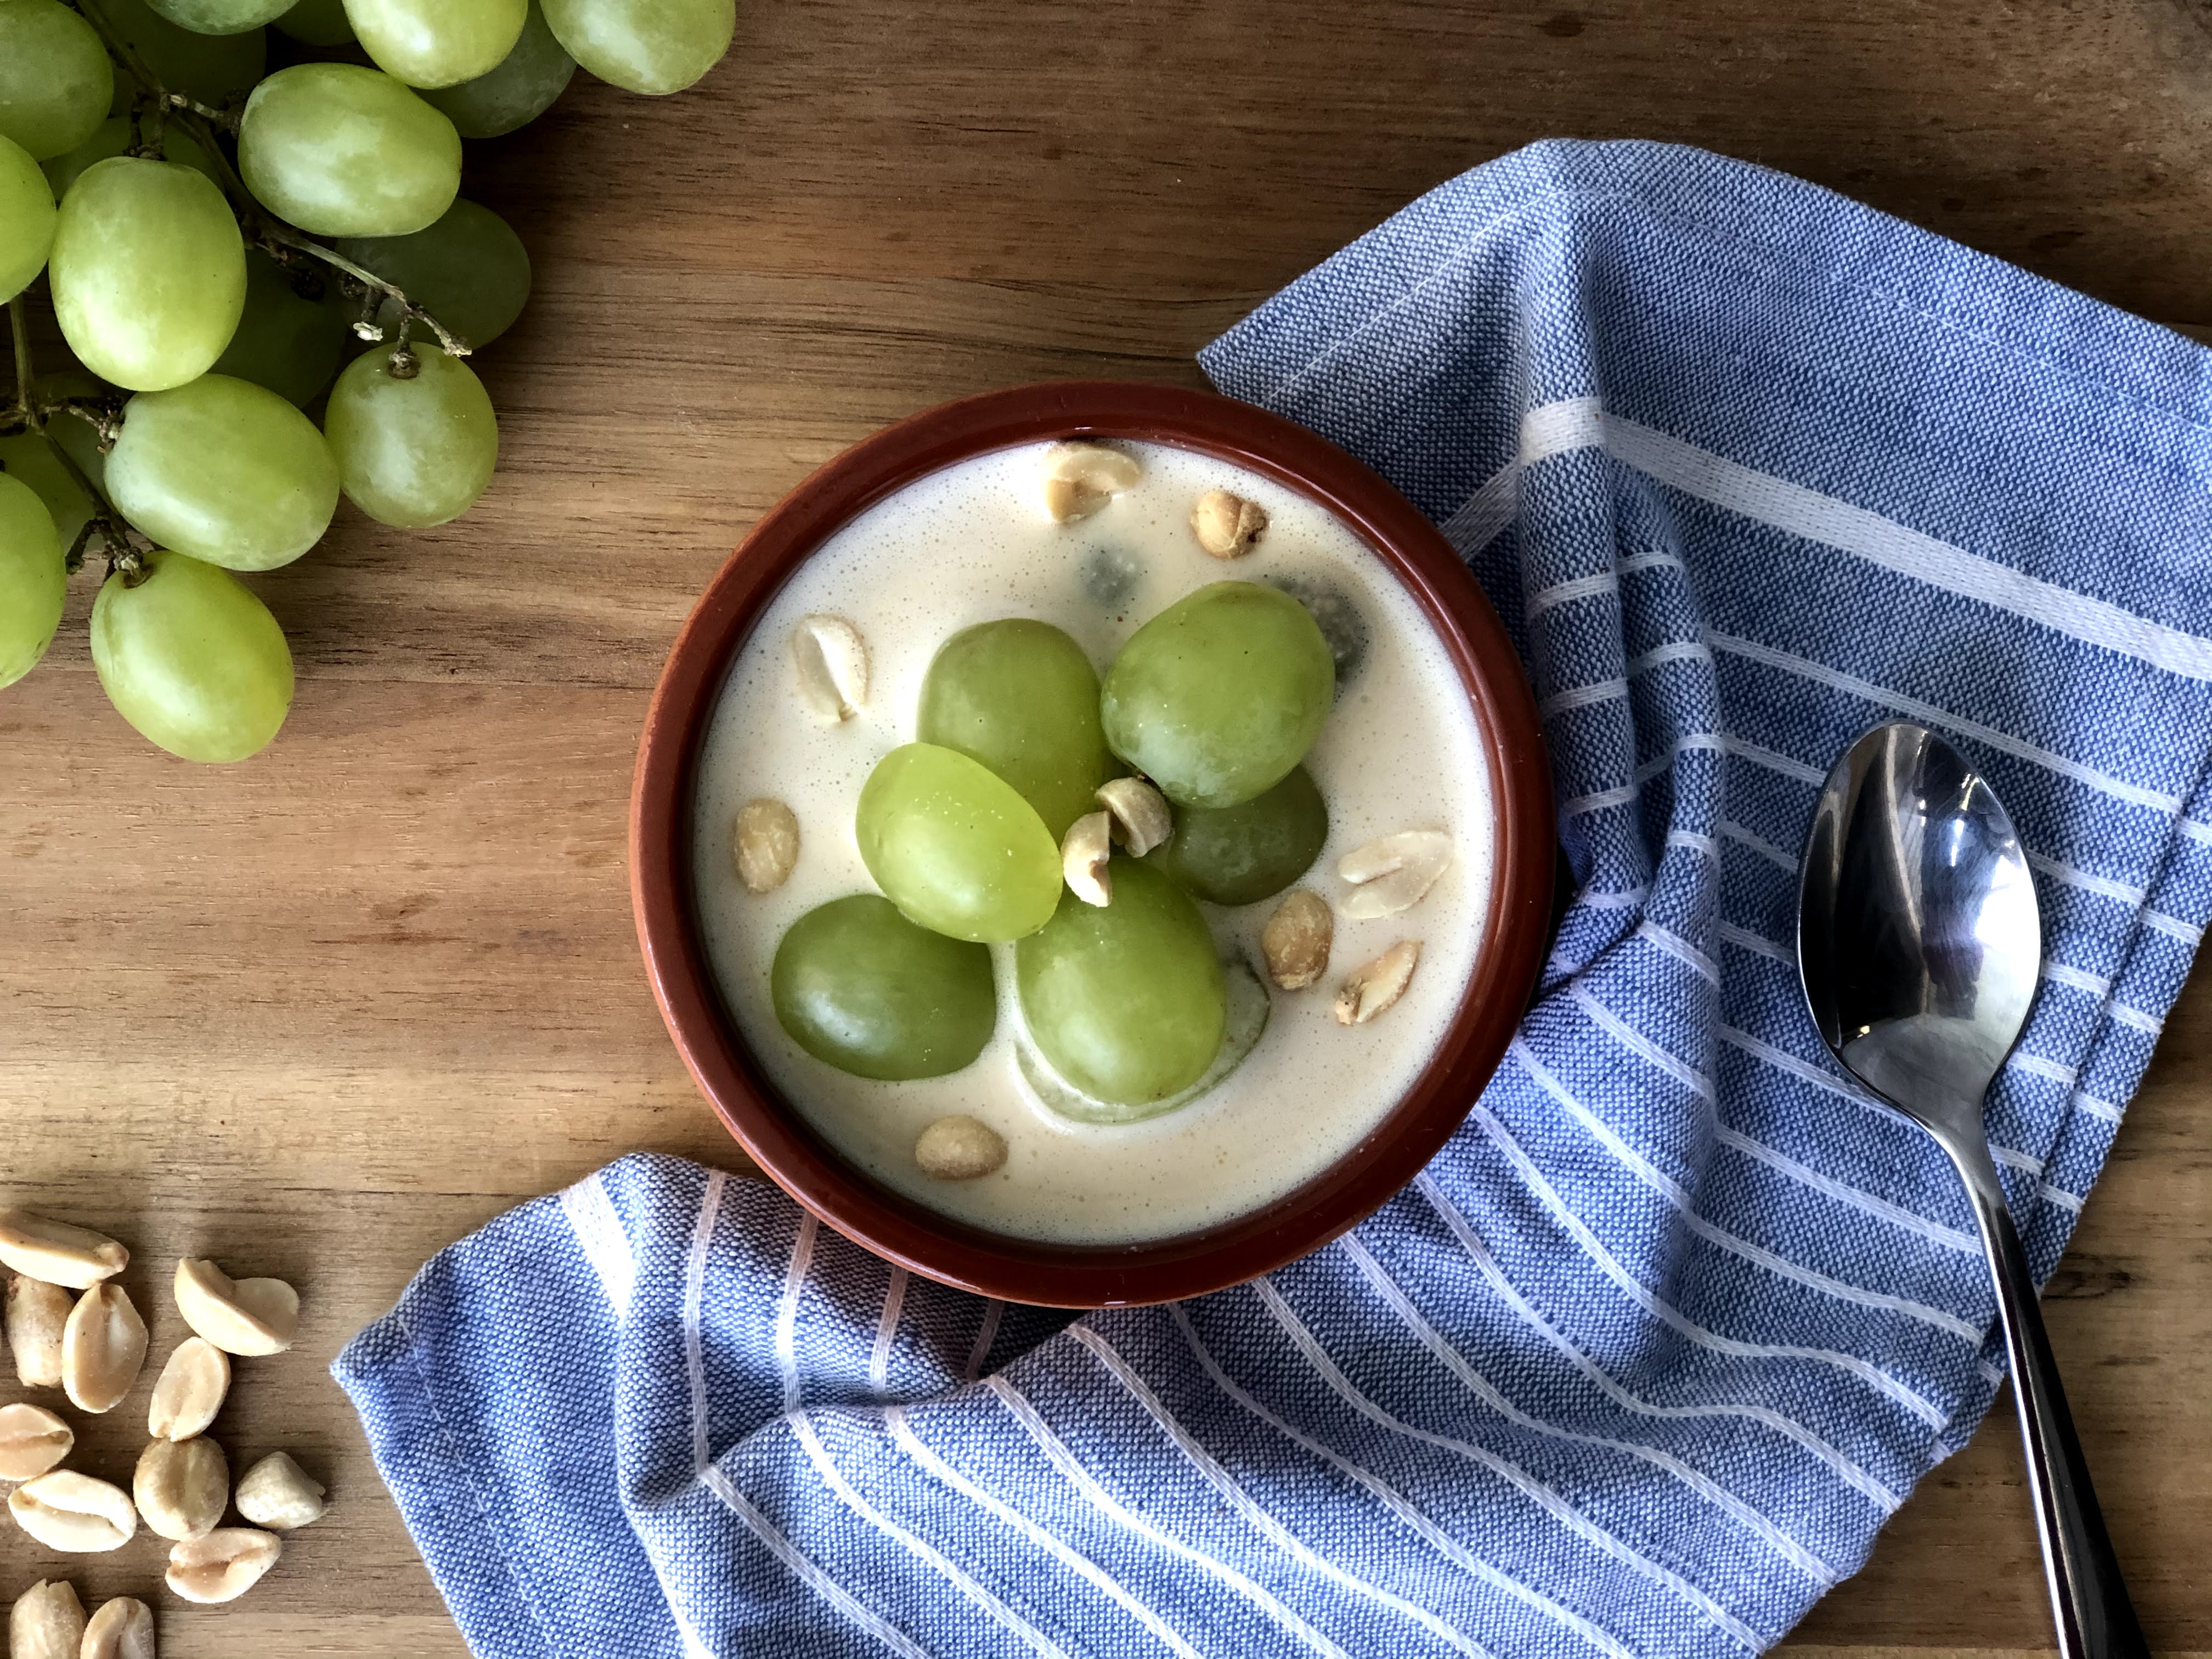 creamy soup topped with green grapes on a wooden surface